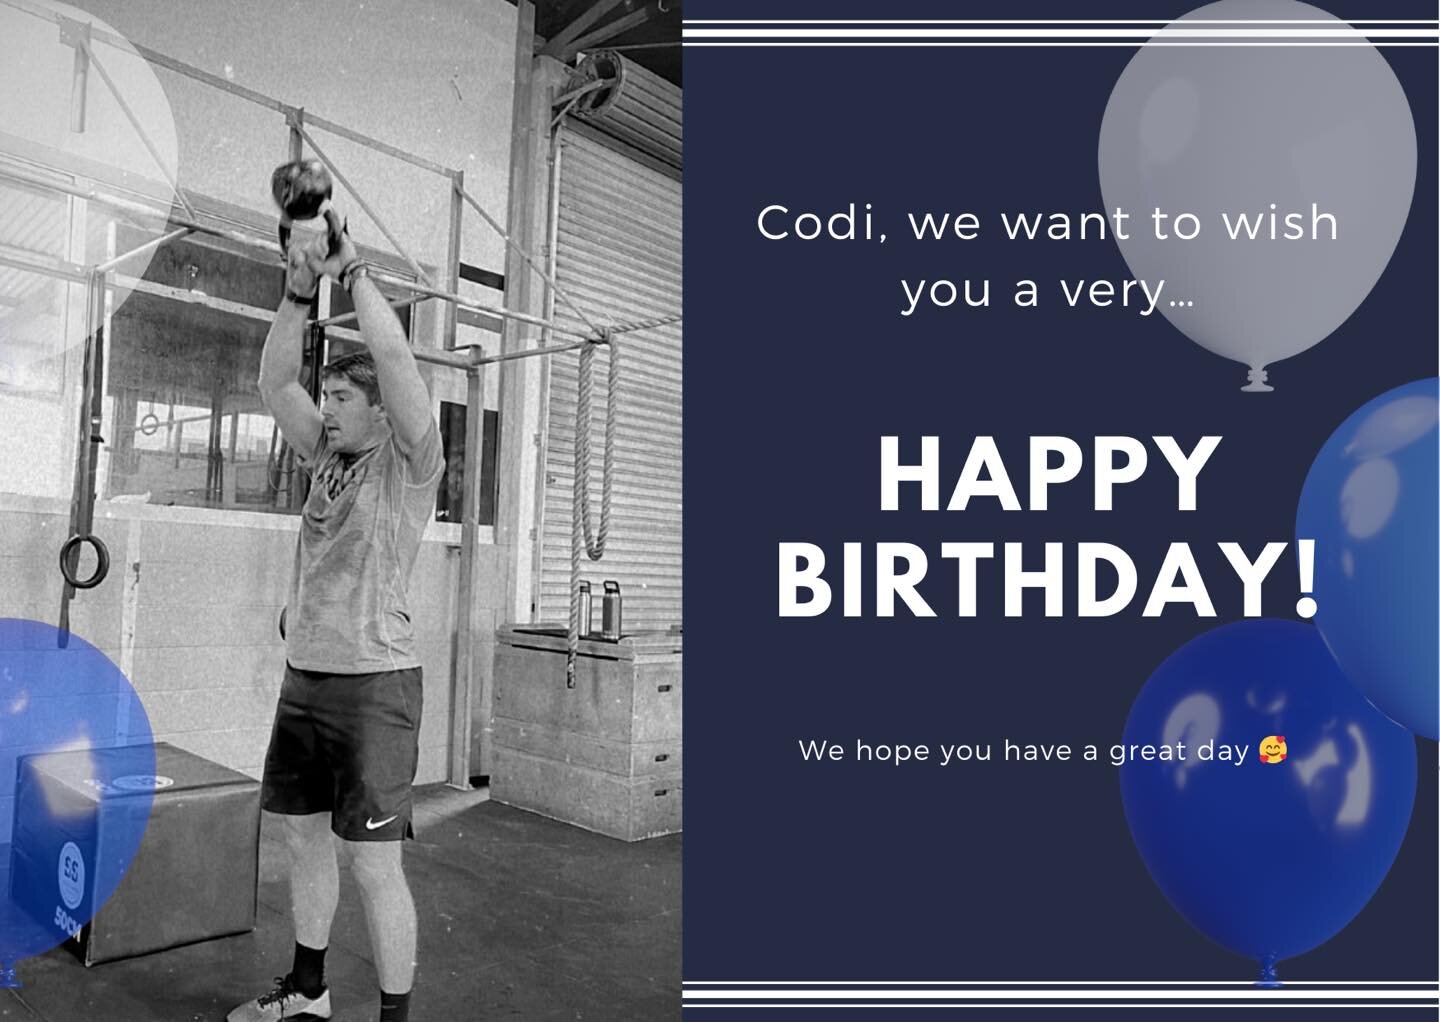 🥳 Happy Birthday Coach Codi 🥳

We hope you have an amazing day doing  all the things you love!!

We are incredibly grateful to have you on the team, thank you for everything you do for us 🥰
Codi Singer